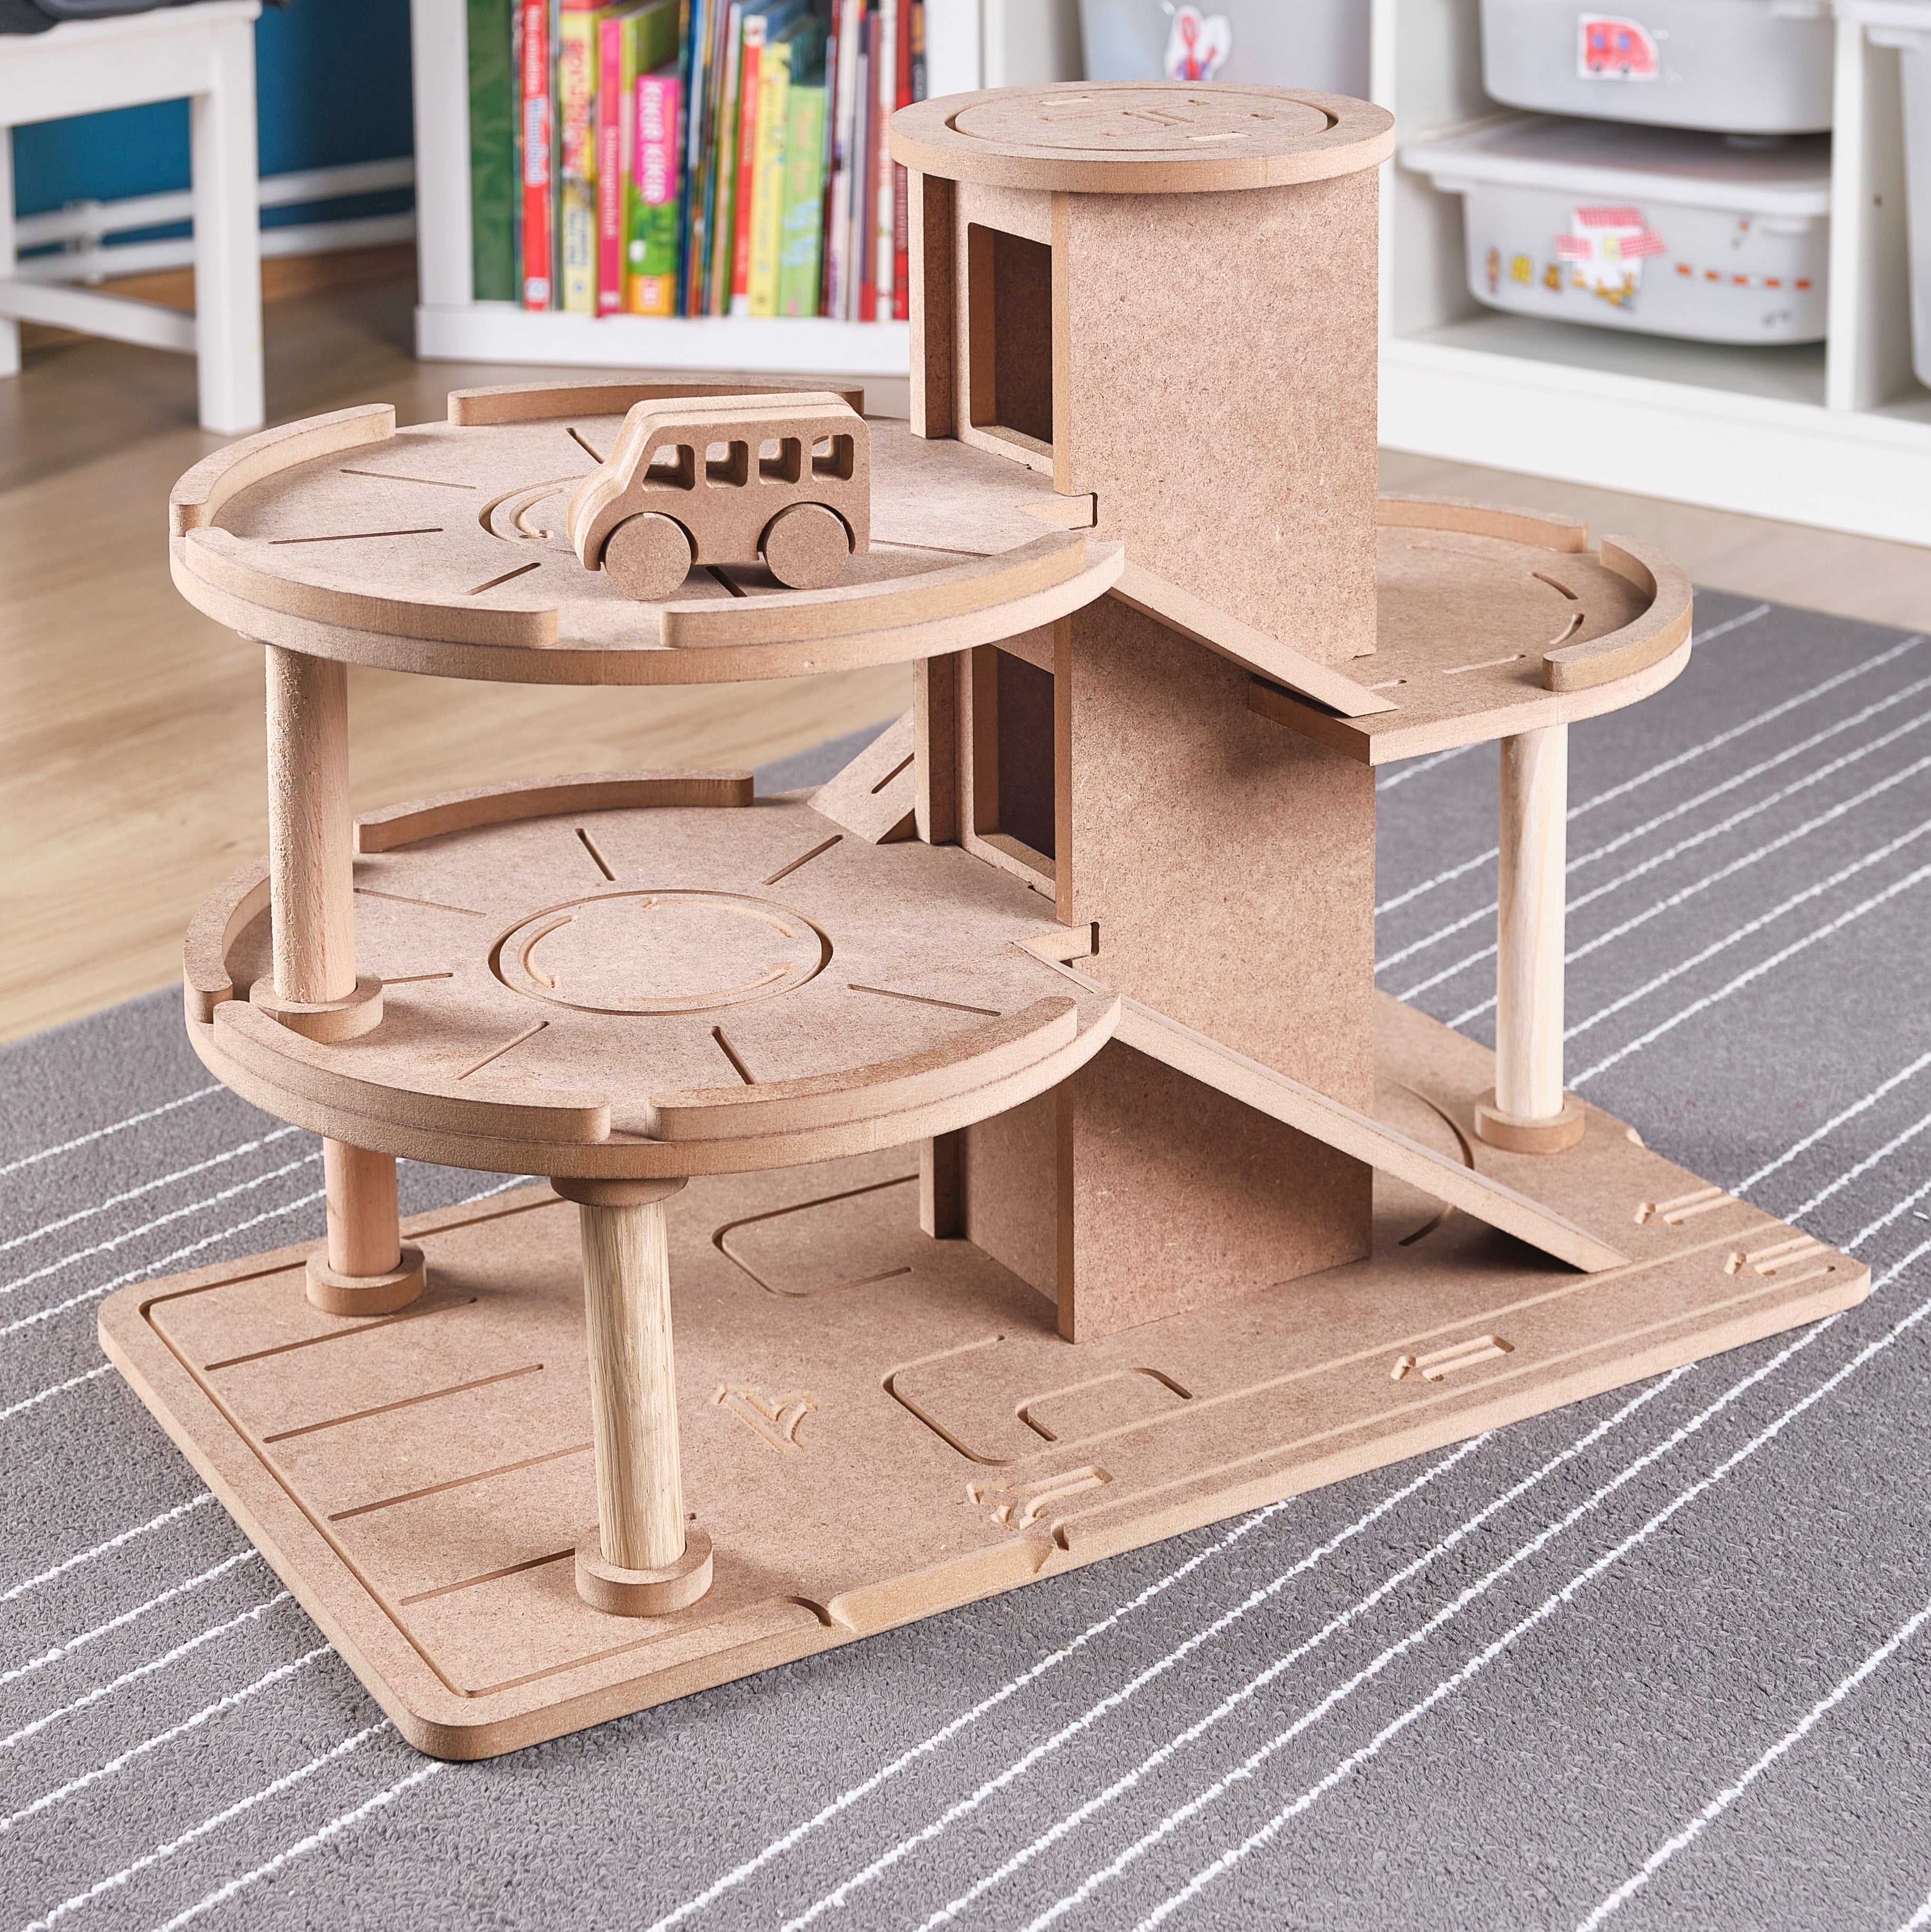 Wooden Parking Car Garage Toy For Toddler with Helo Pist